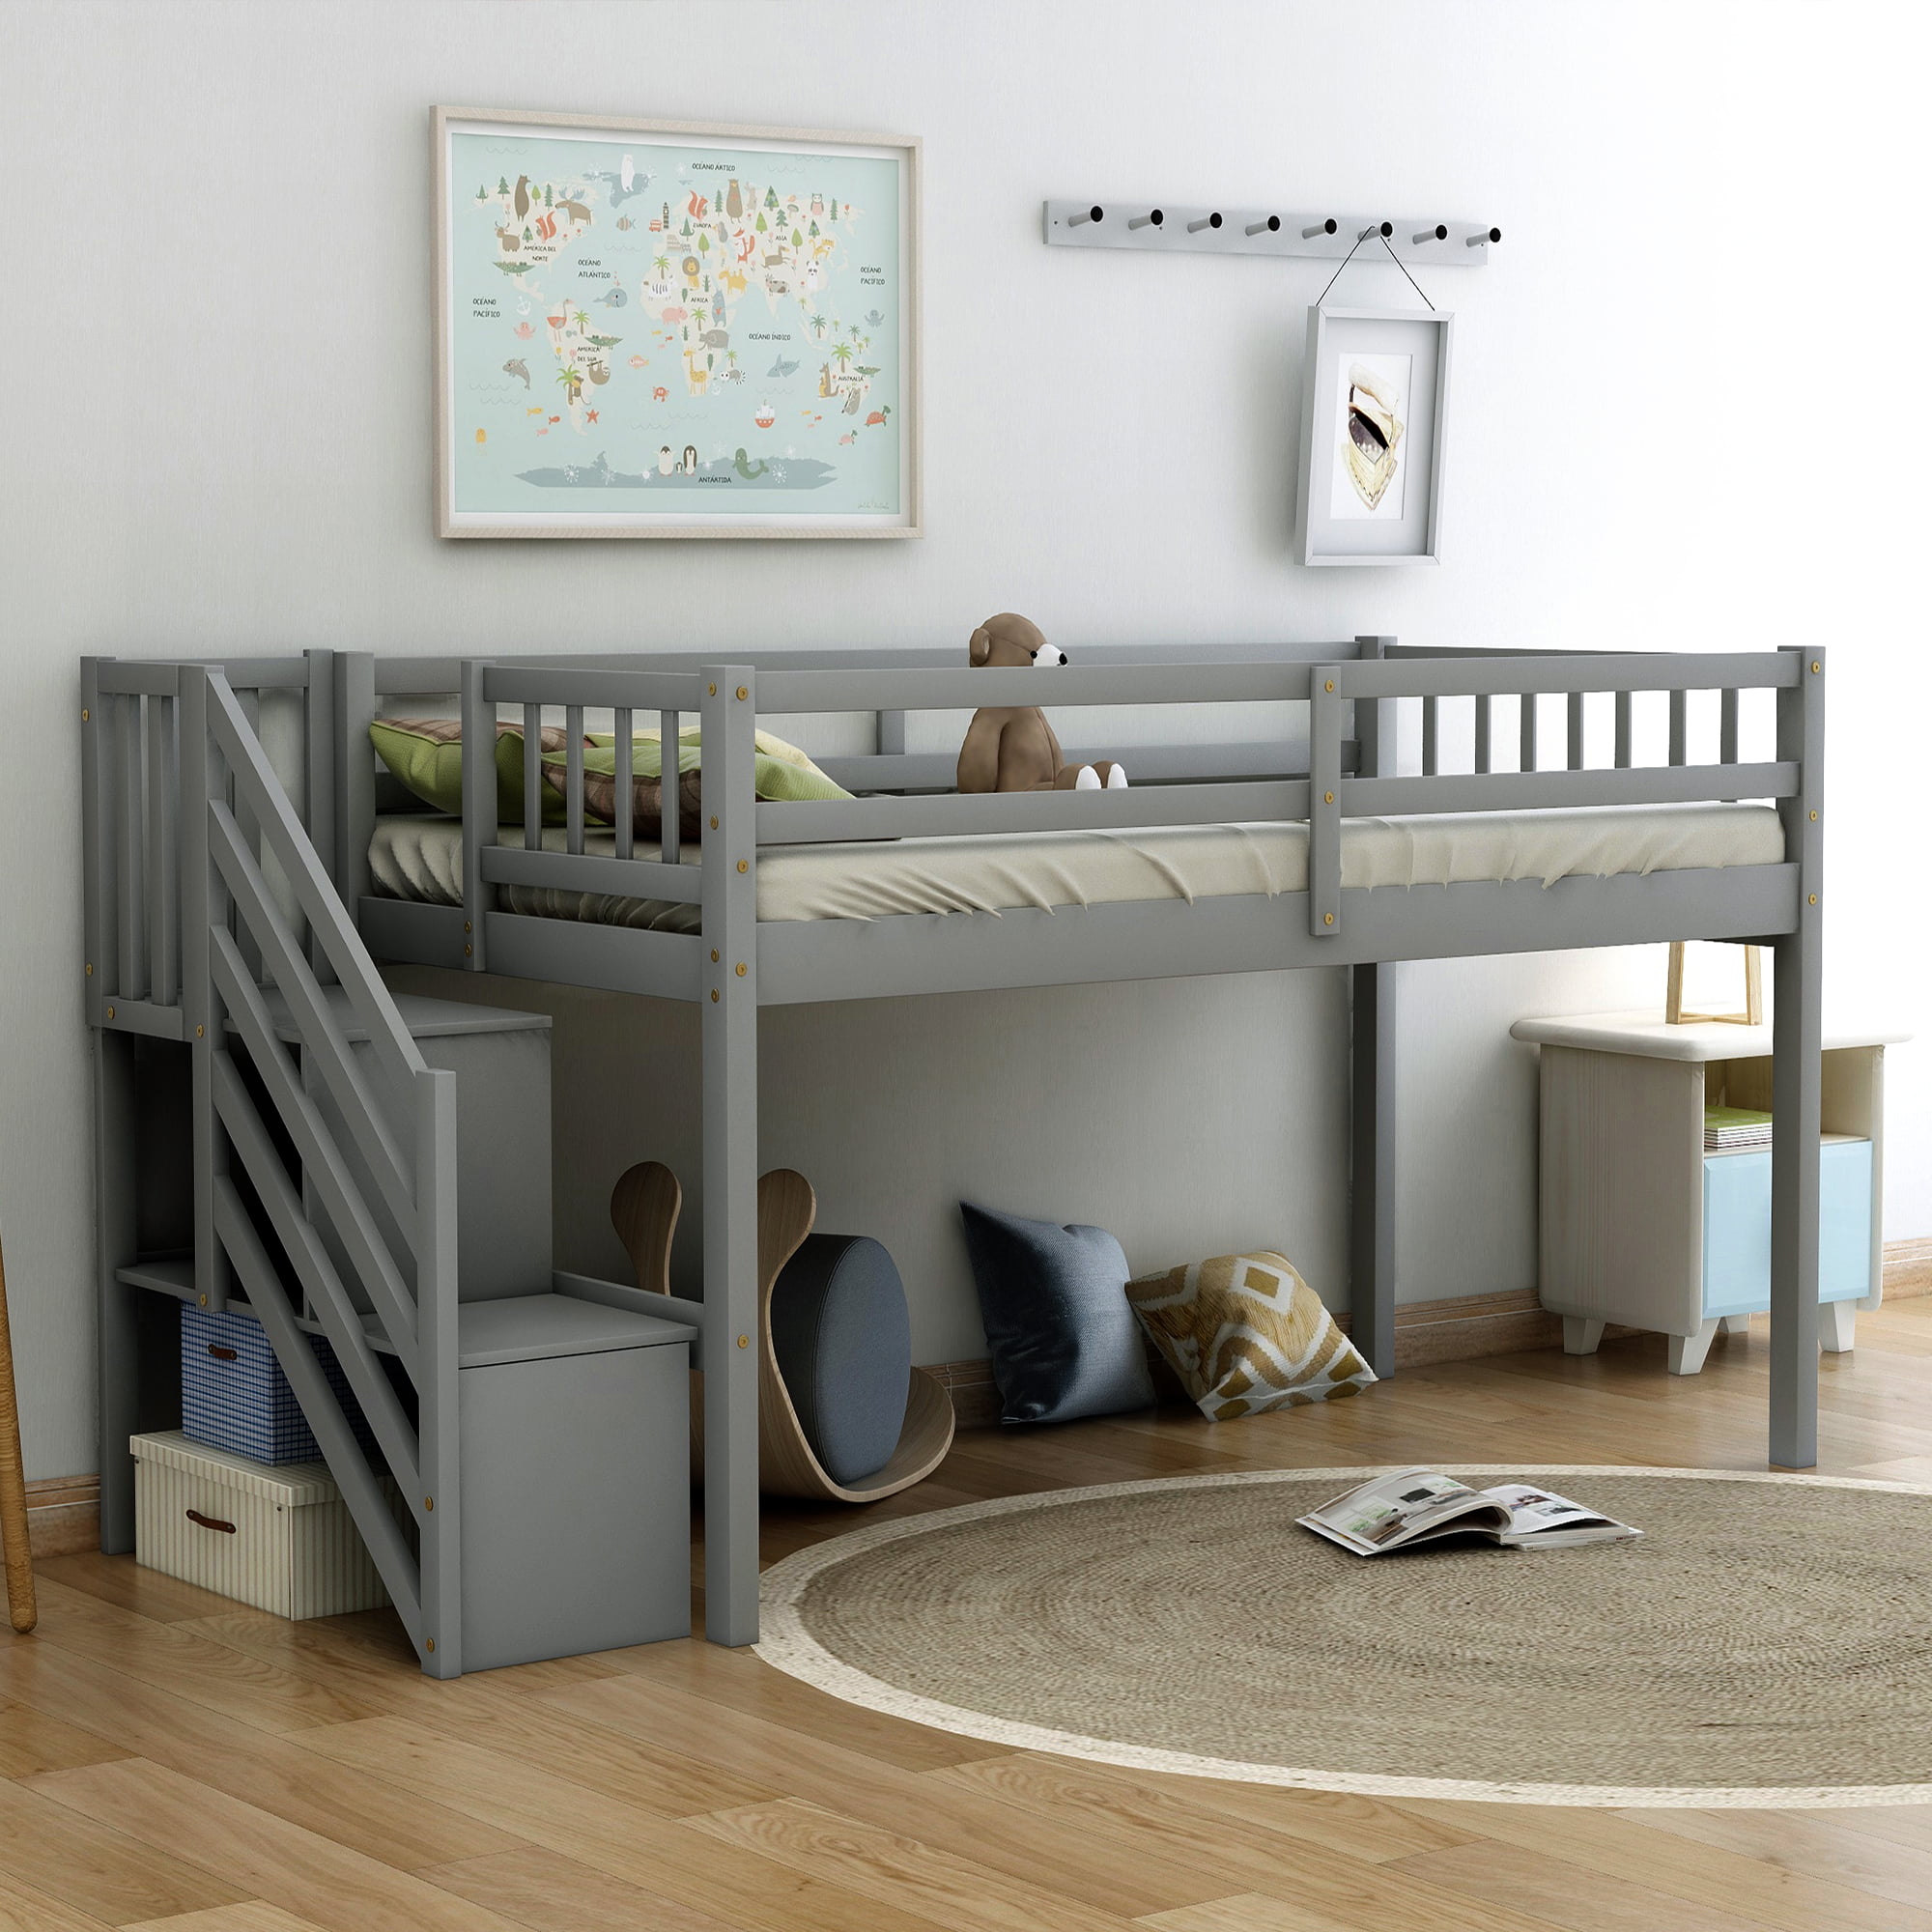 Euroco Wood Twin Loft Bed With Stairs, Utica Lofts Dorm Twin Loft Bed With Storage Staircase